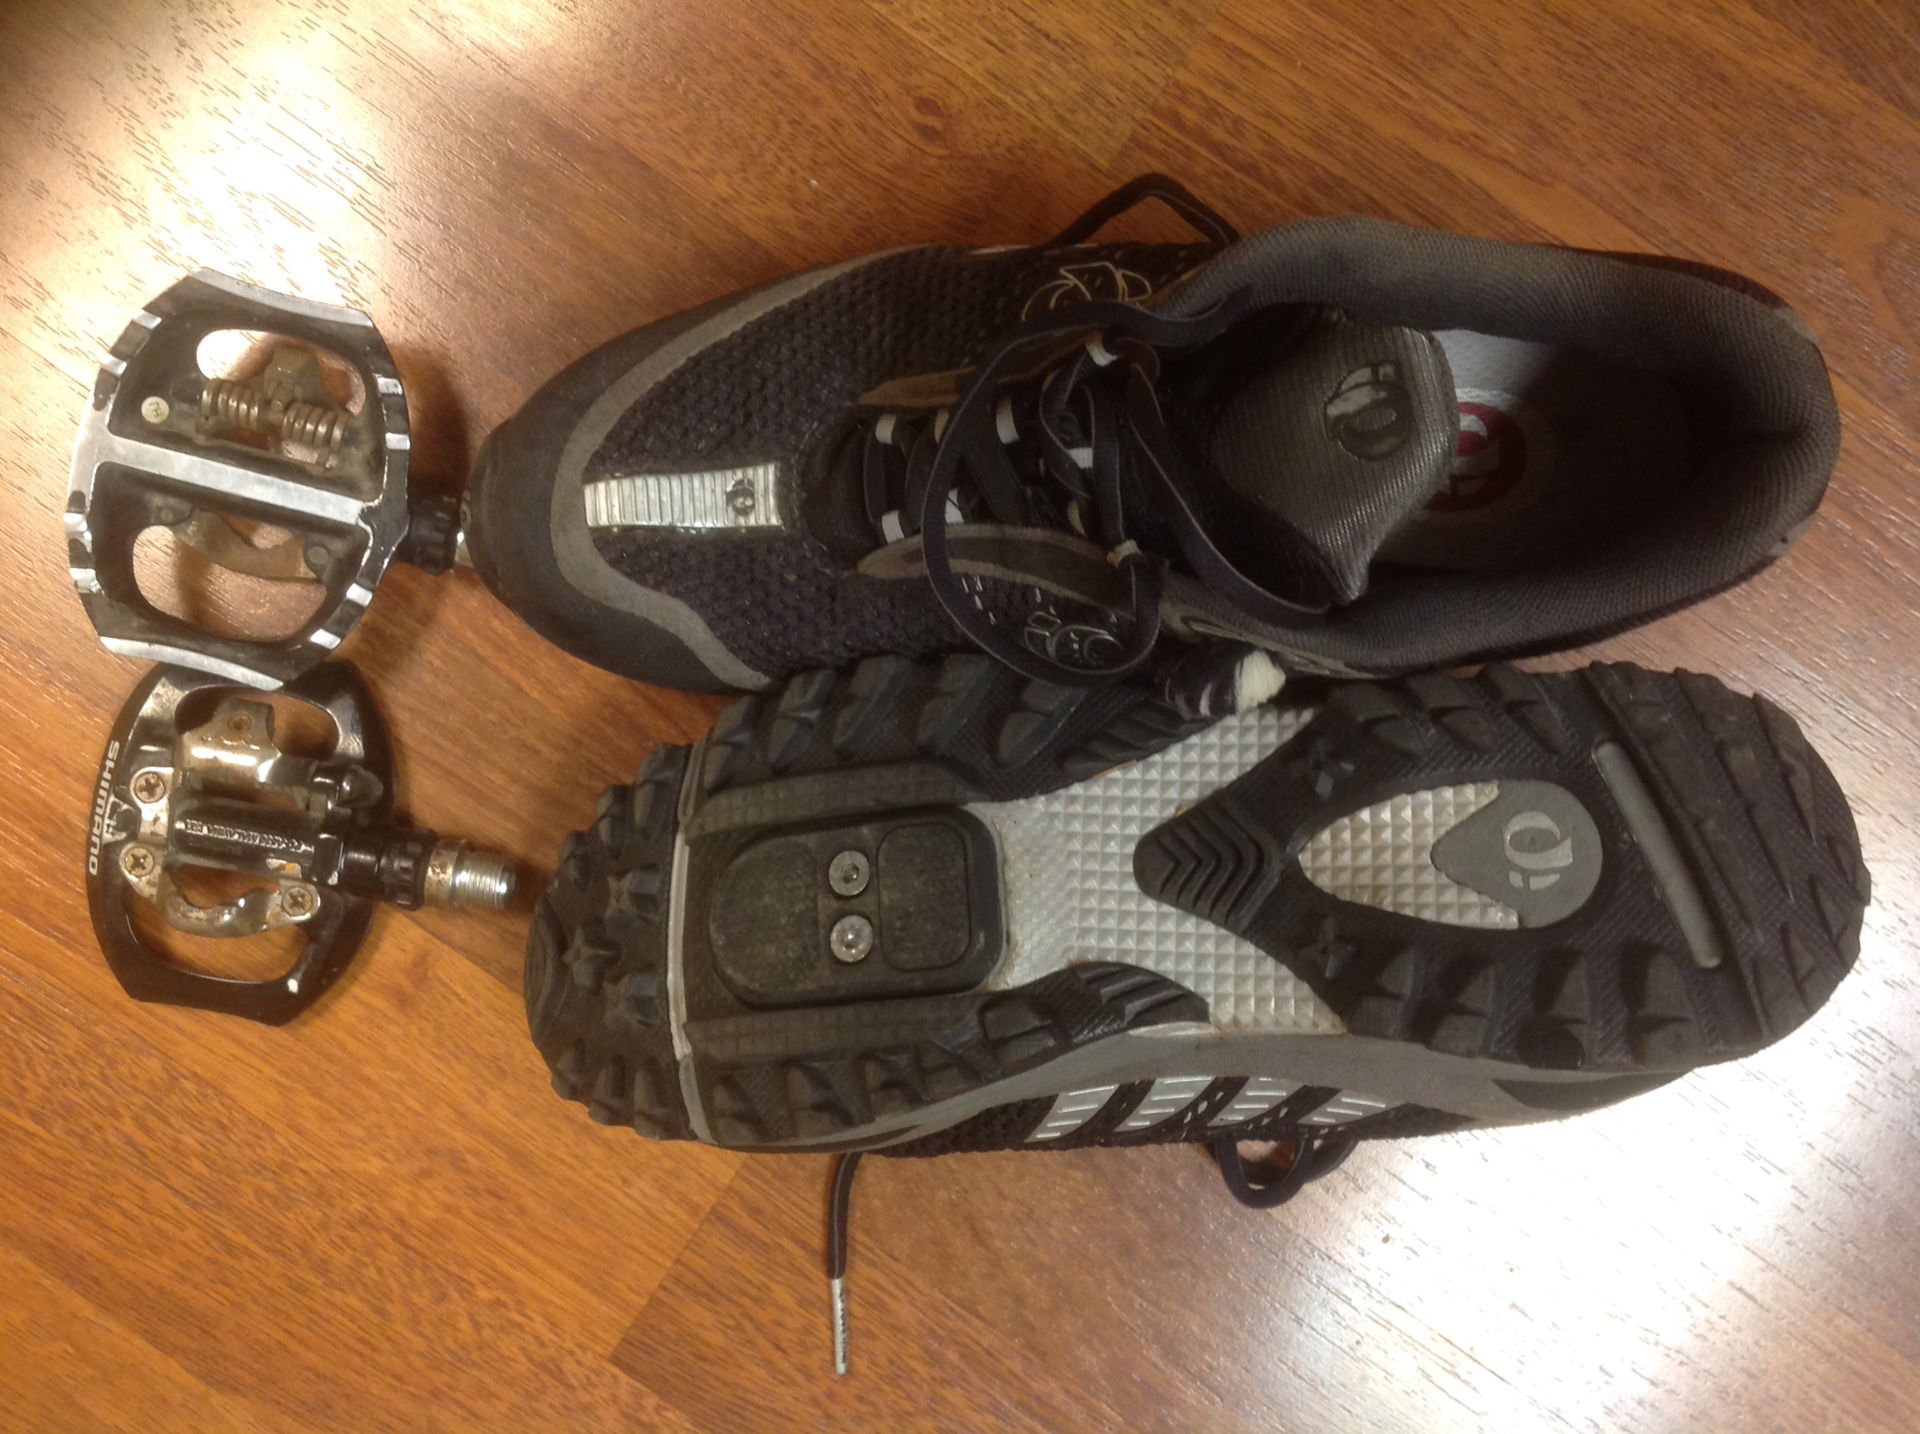 Pearl Izumi size 10 men's bike shoes with clips and pedals